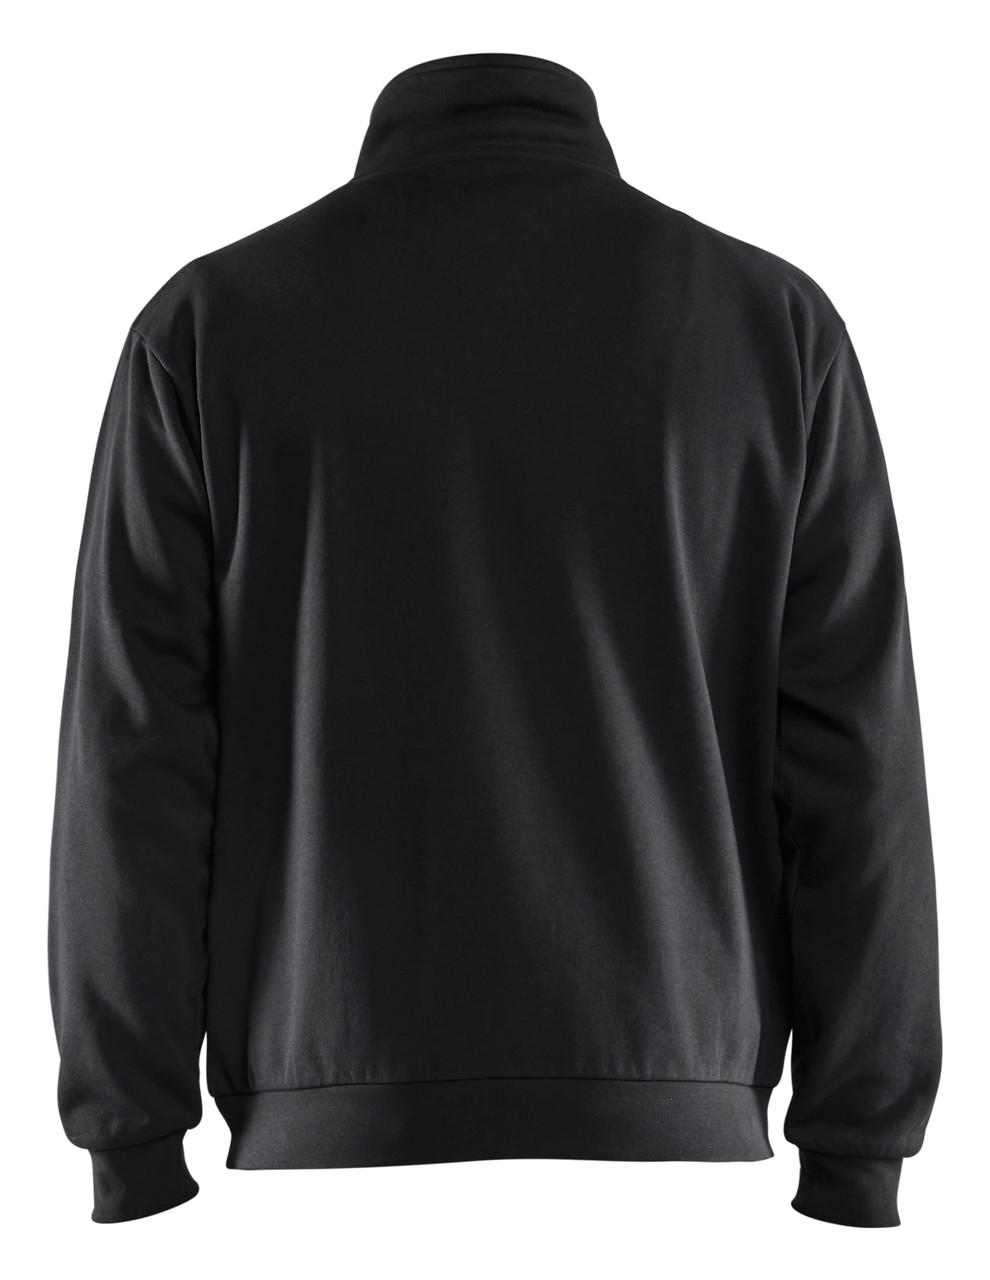 Buy online in Australia and New Zealand a  Black Pullover  for Carpenters that are comfortable and durable.